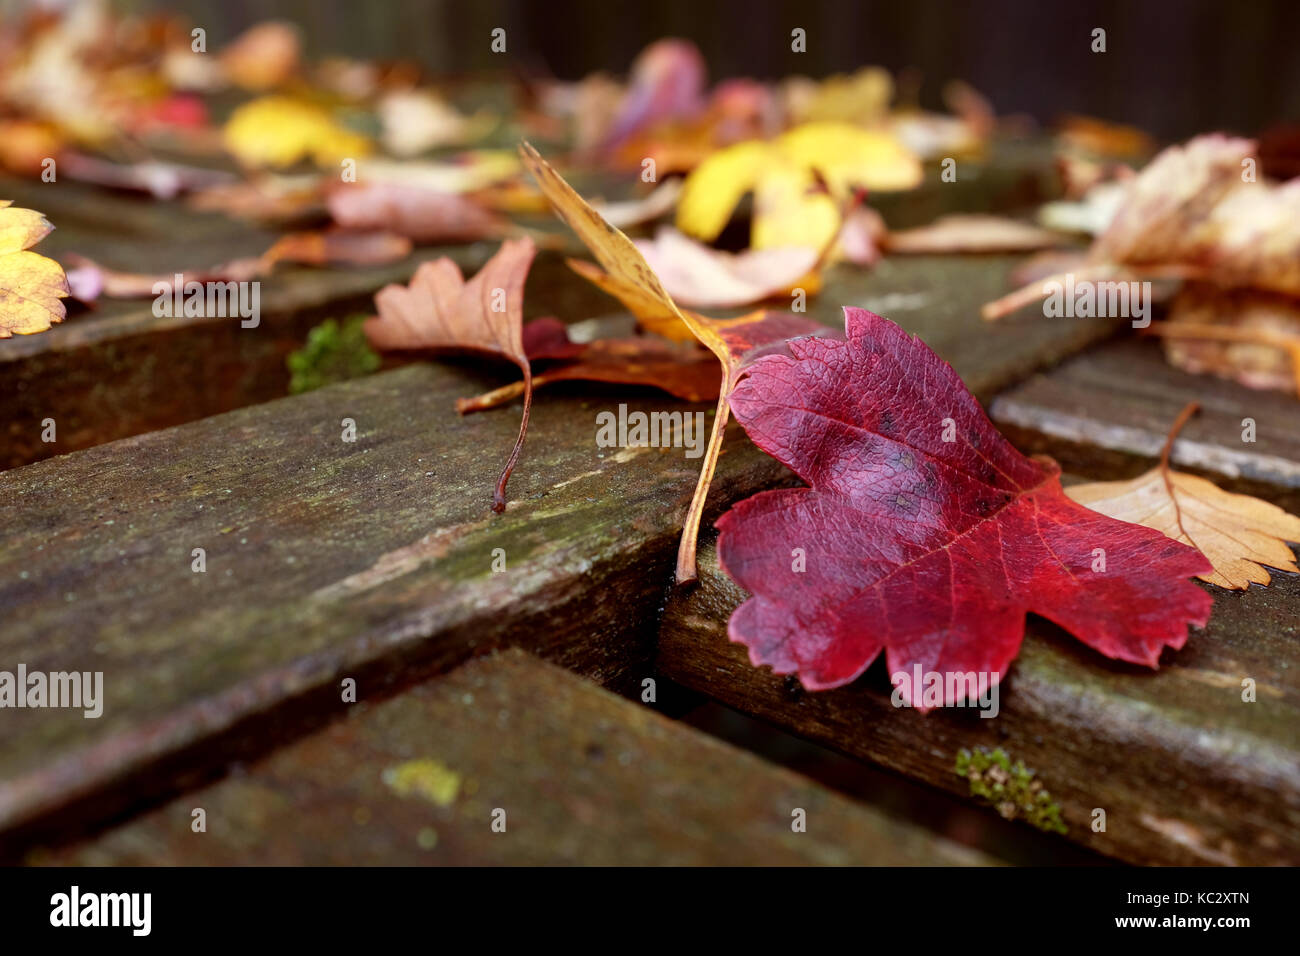 Close-up of red hawthorn leaf on a weathered wooden bench covered with fall leaves Stock Photo